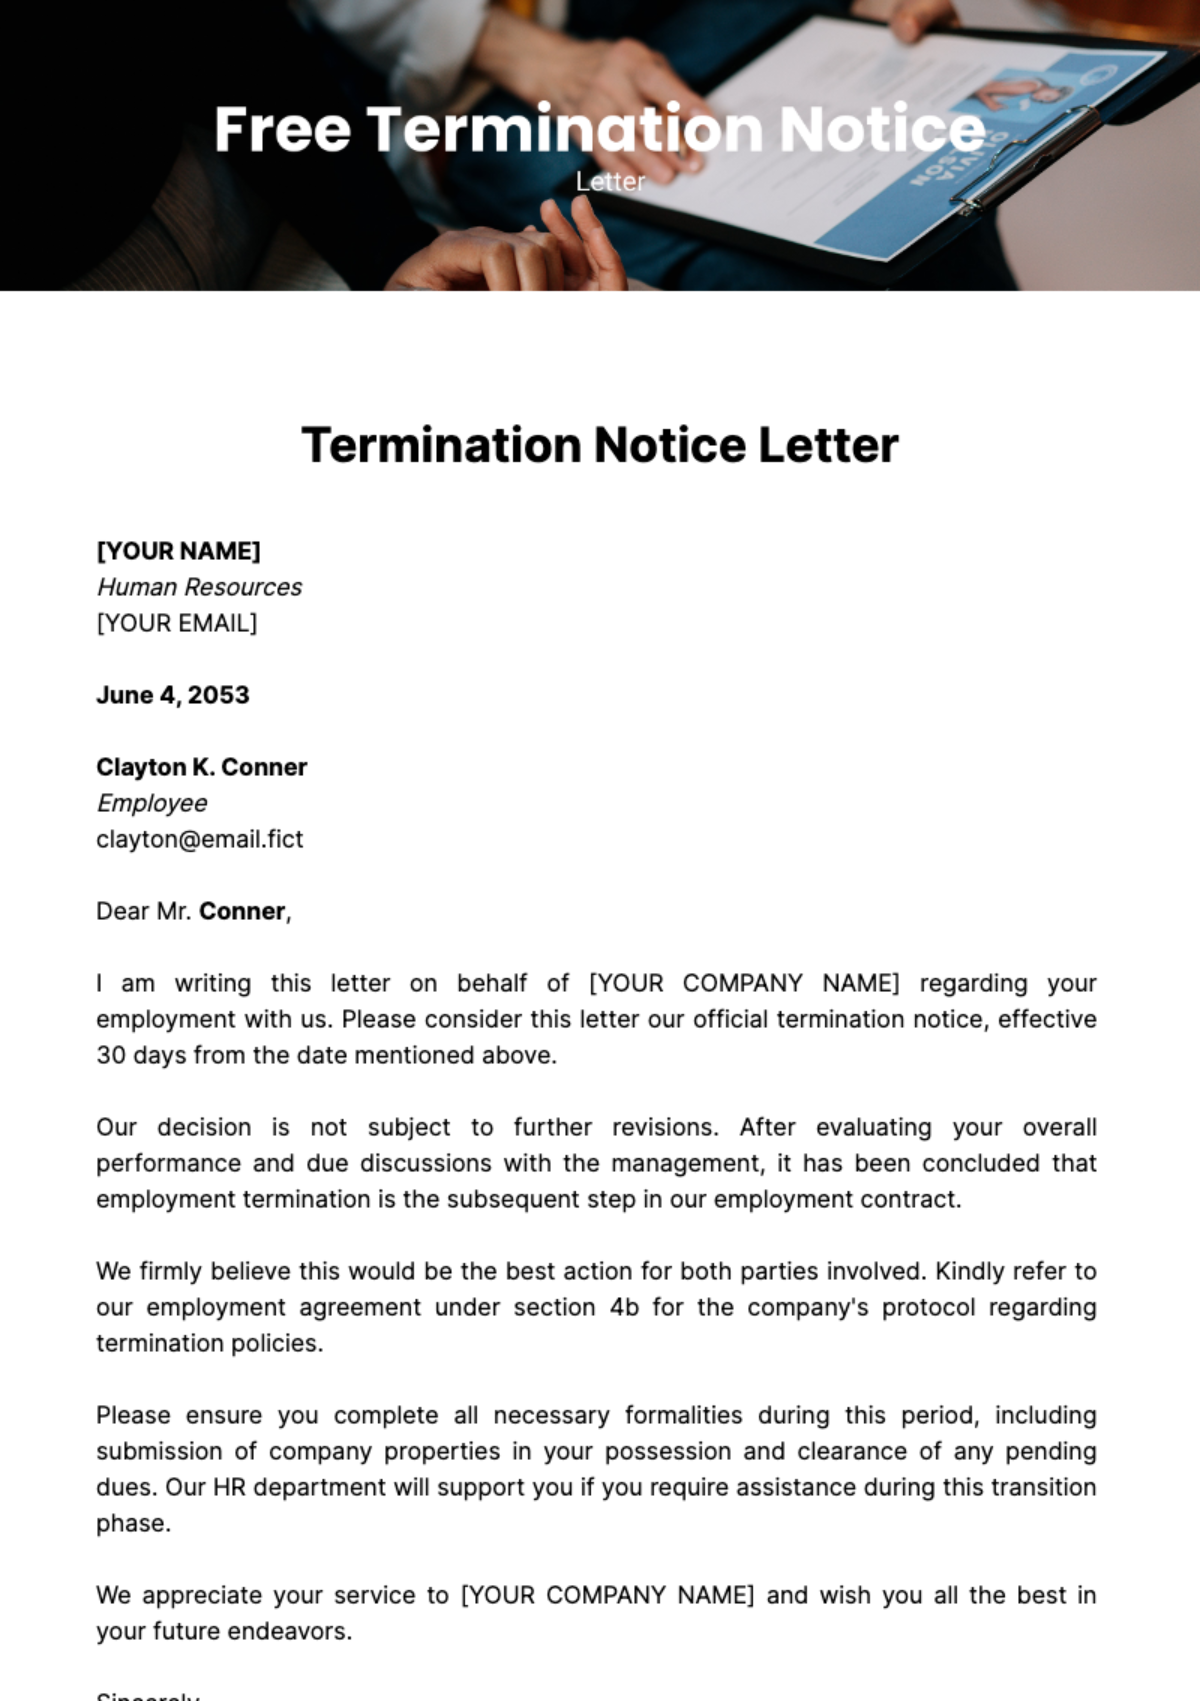 Free Termination Notice Letter Template